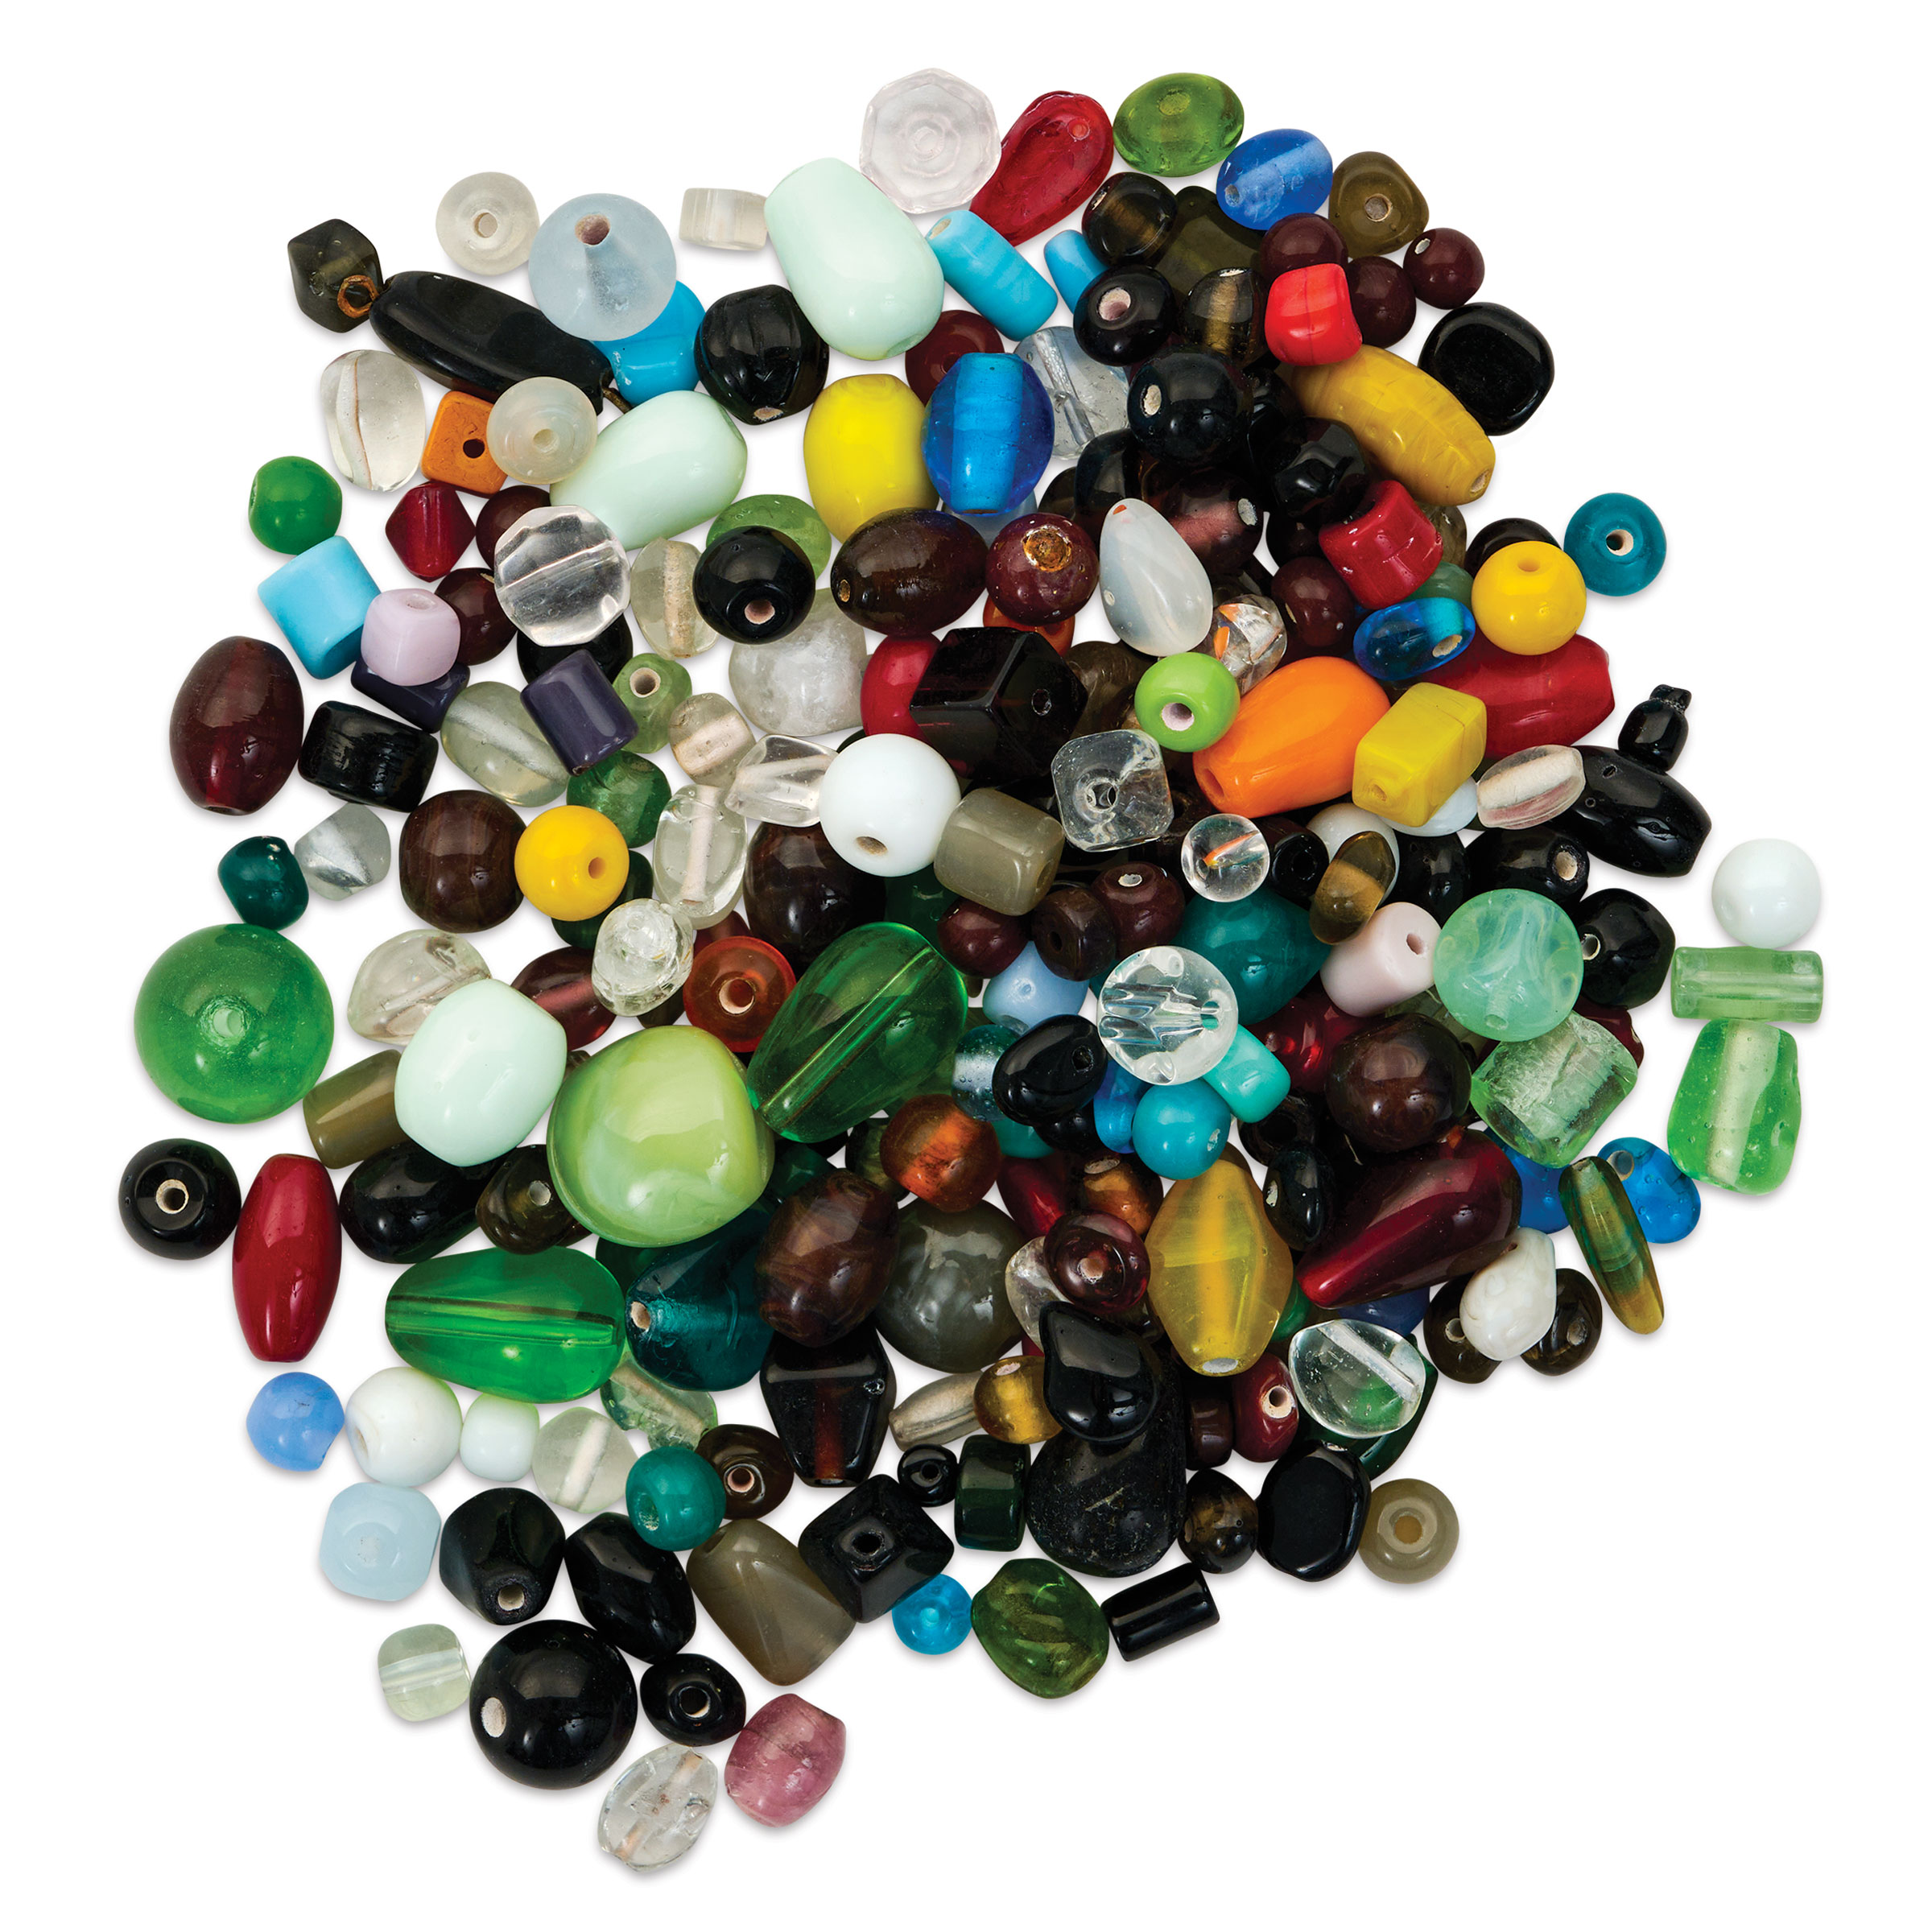 Craft Medley Glass Beads - Assorted Colors, 3.5 oz